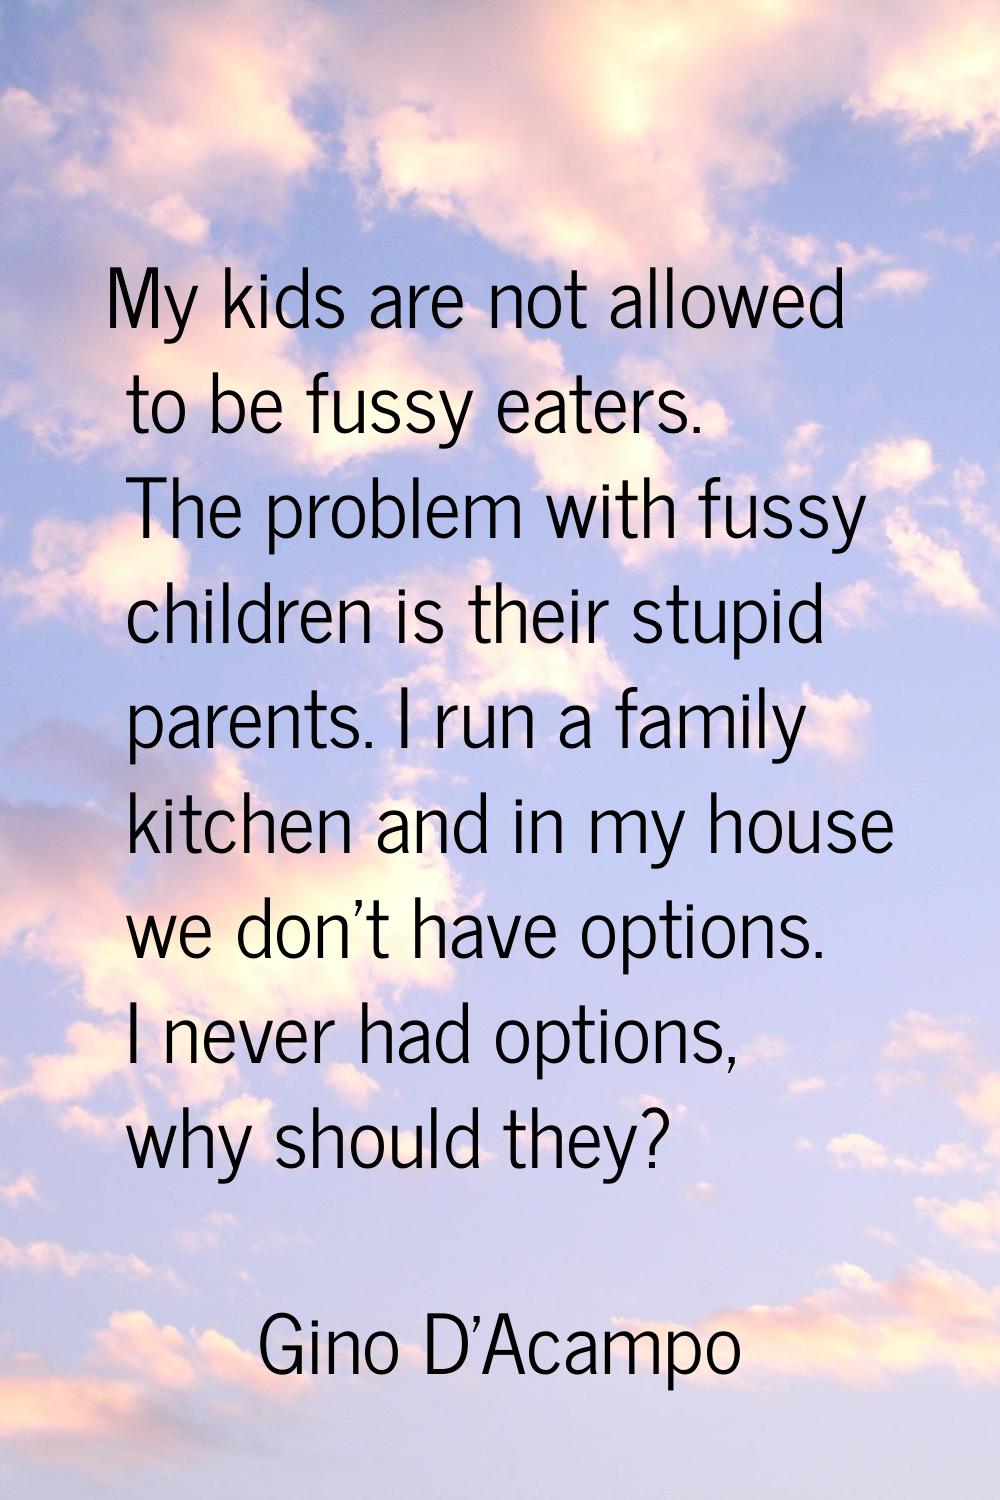 My kids are not allowed to be fussy eaters. The problem with fussy children is their stupid parents